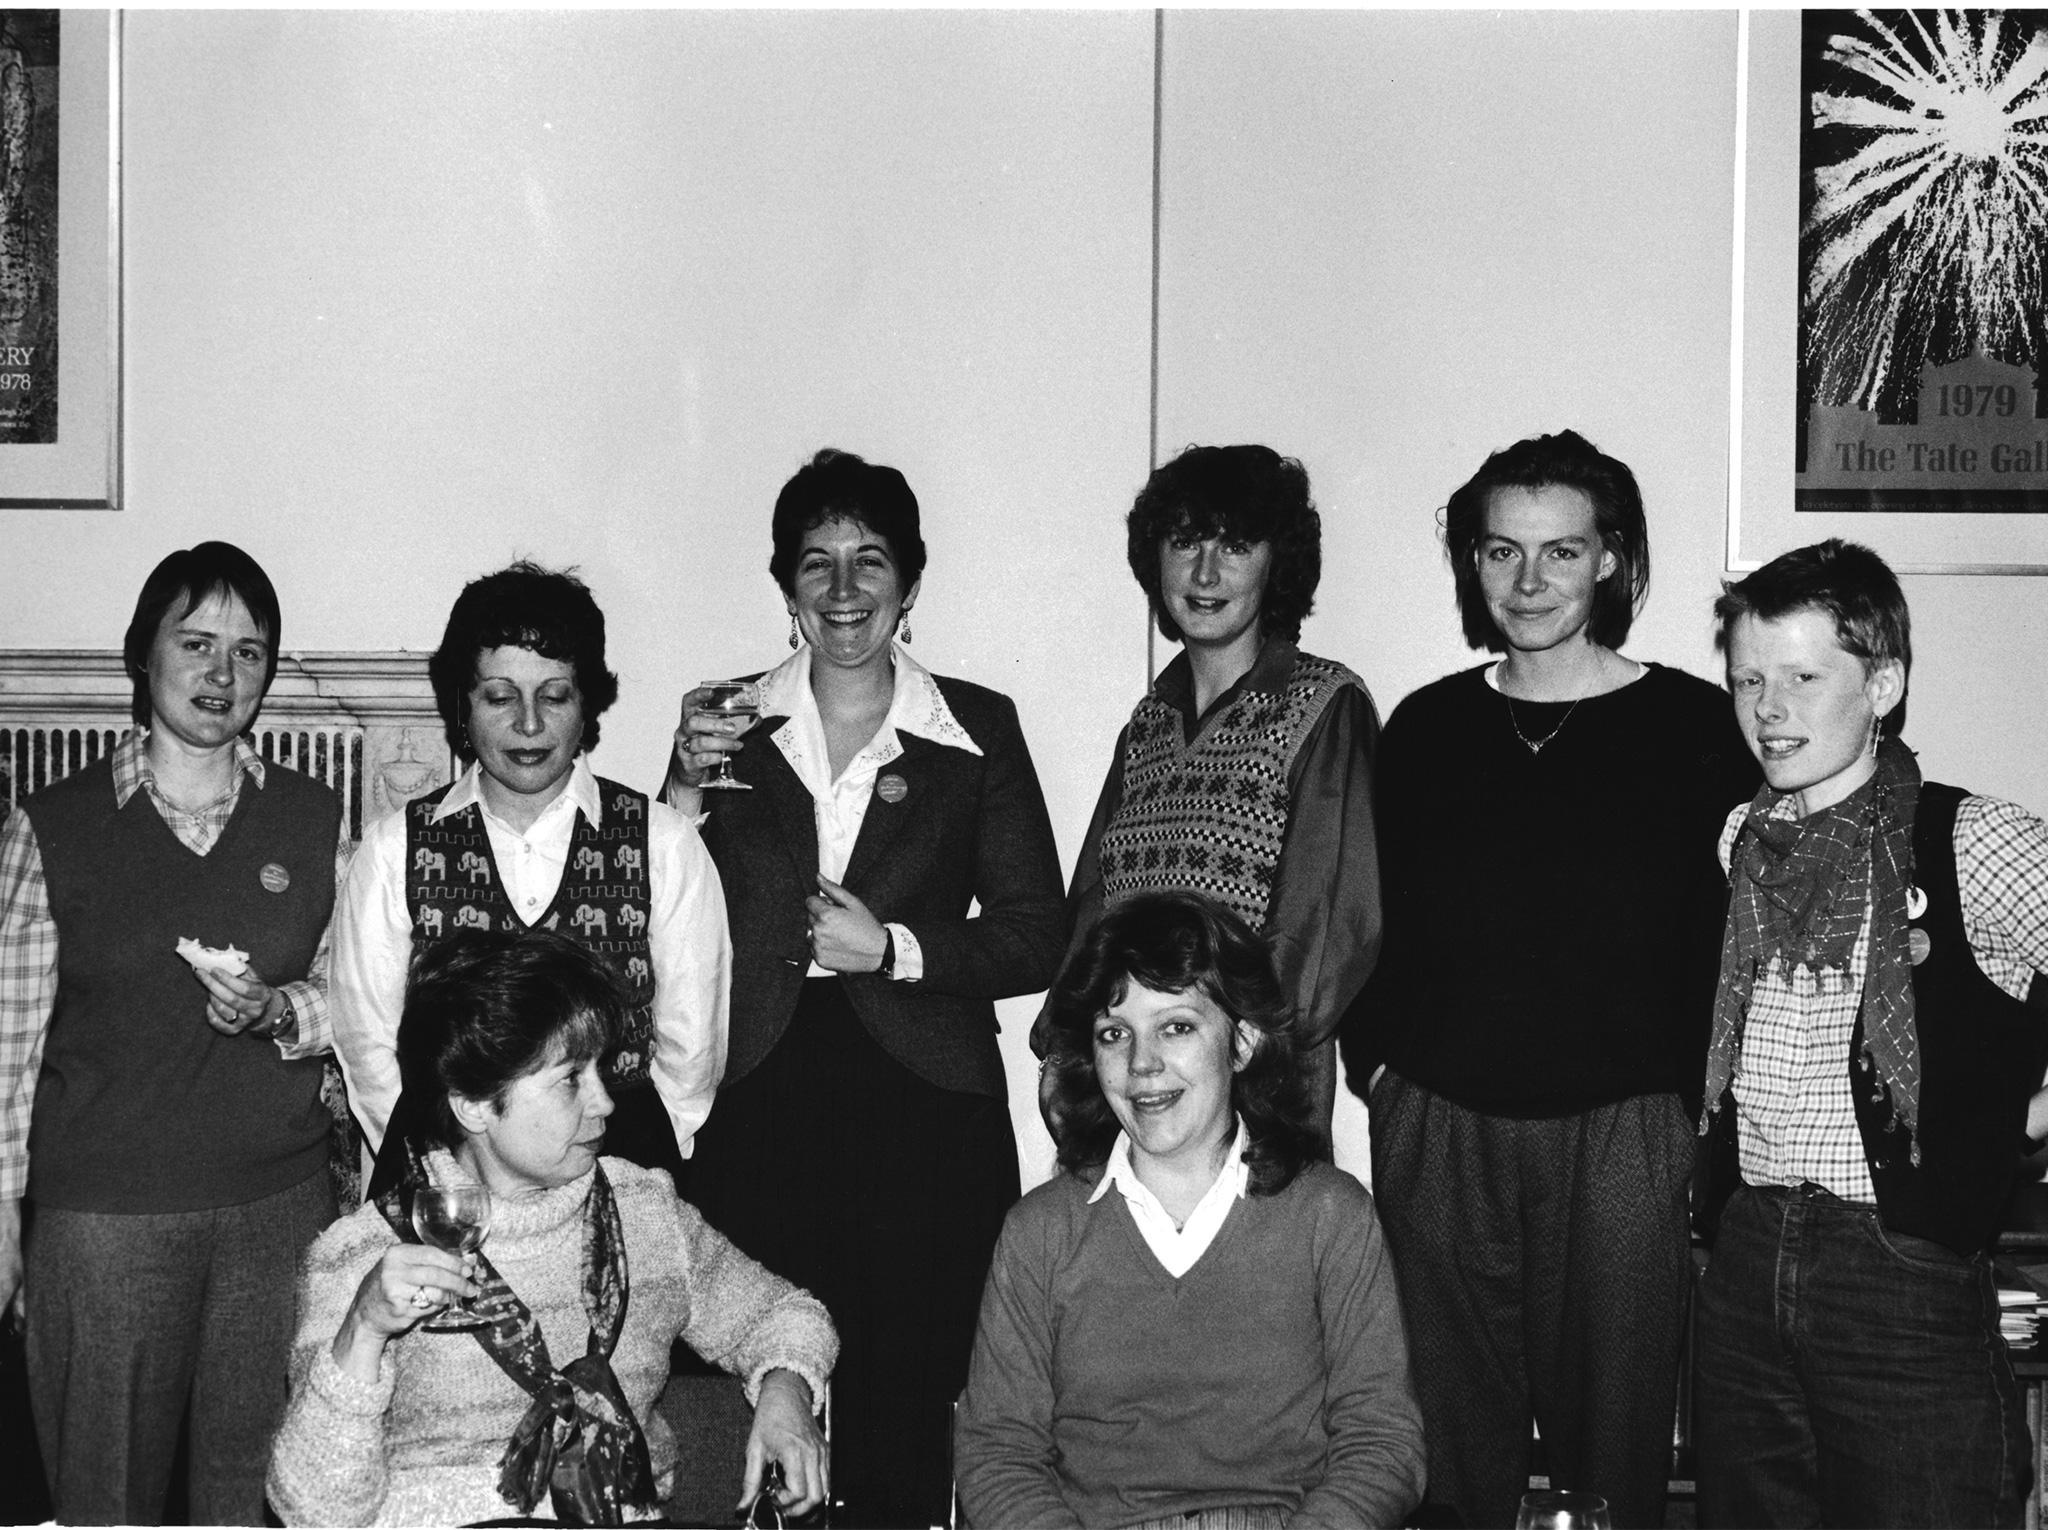 The WiP Committee, 1981: Sue Butterworth, Shelley Power, Nina Shandloff, Diane Spivey, Fenella Greenfield, Jane Anger, Carol Easton and unidentified